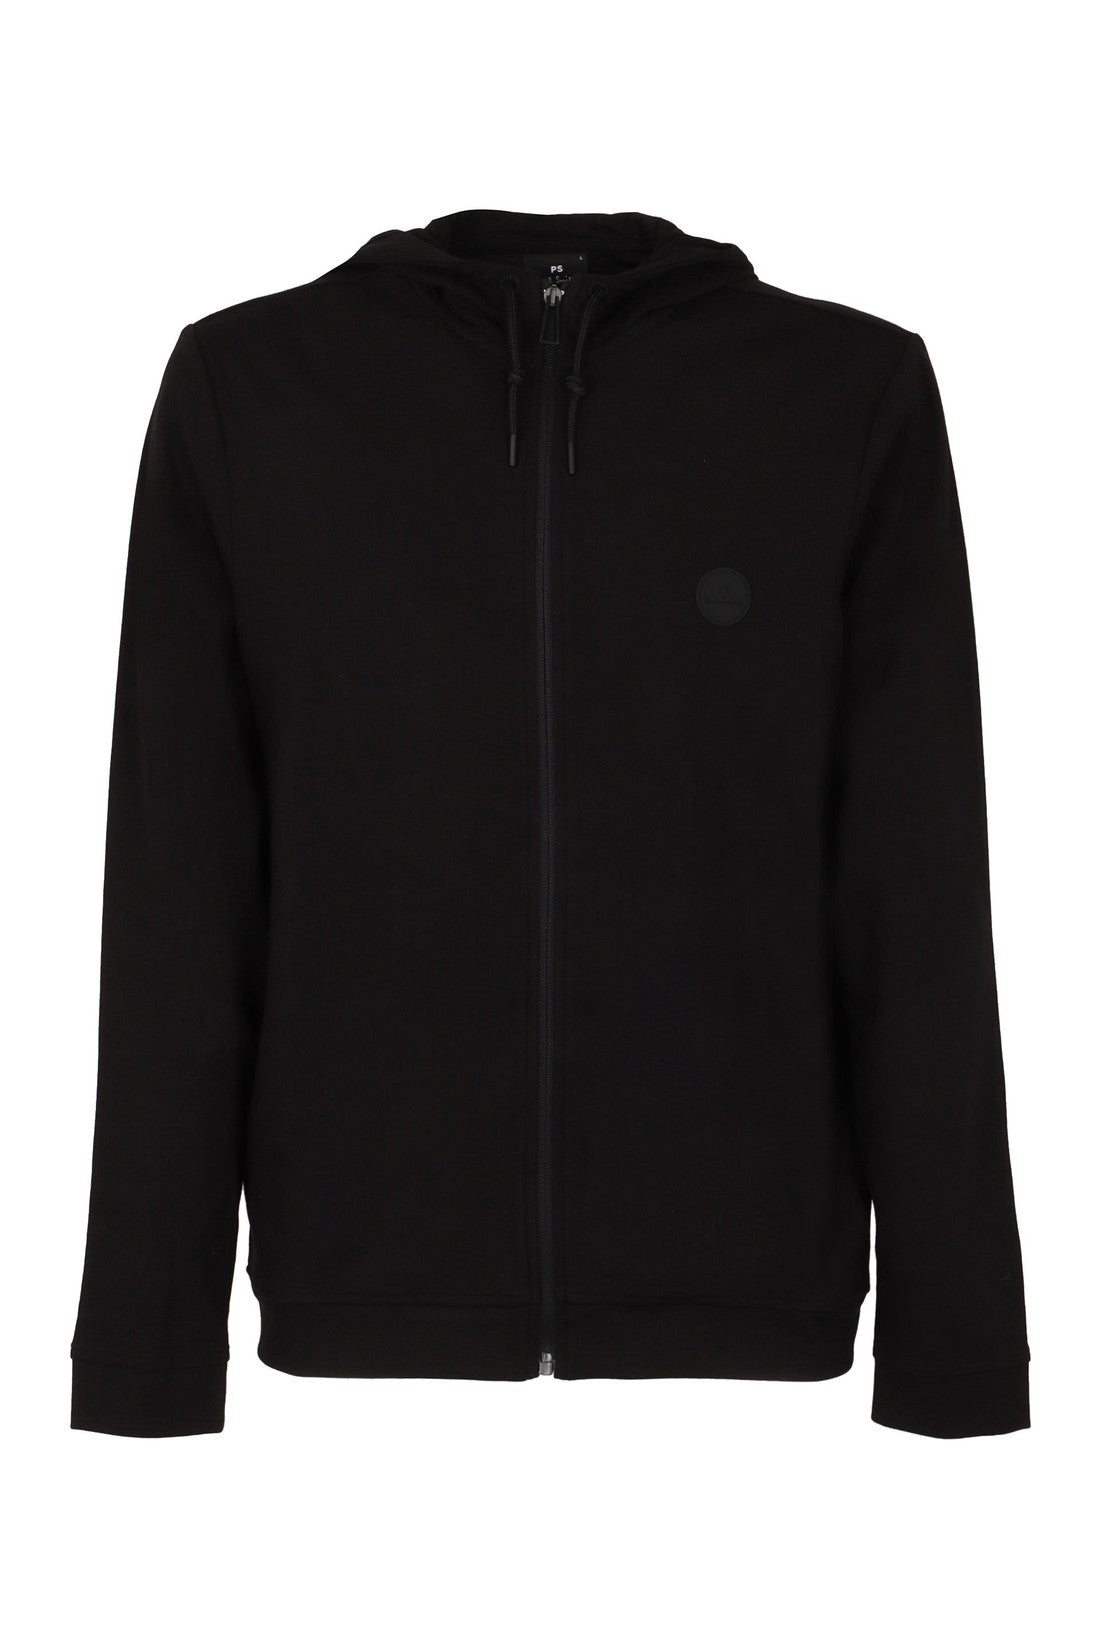 Paul Smith-OUTLET-SALE-Full zip hoodie-ARCHIVIST